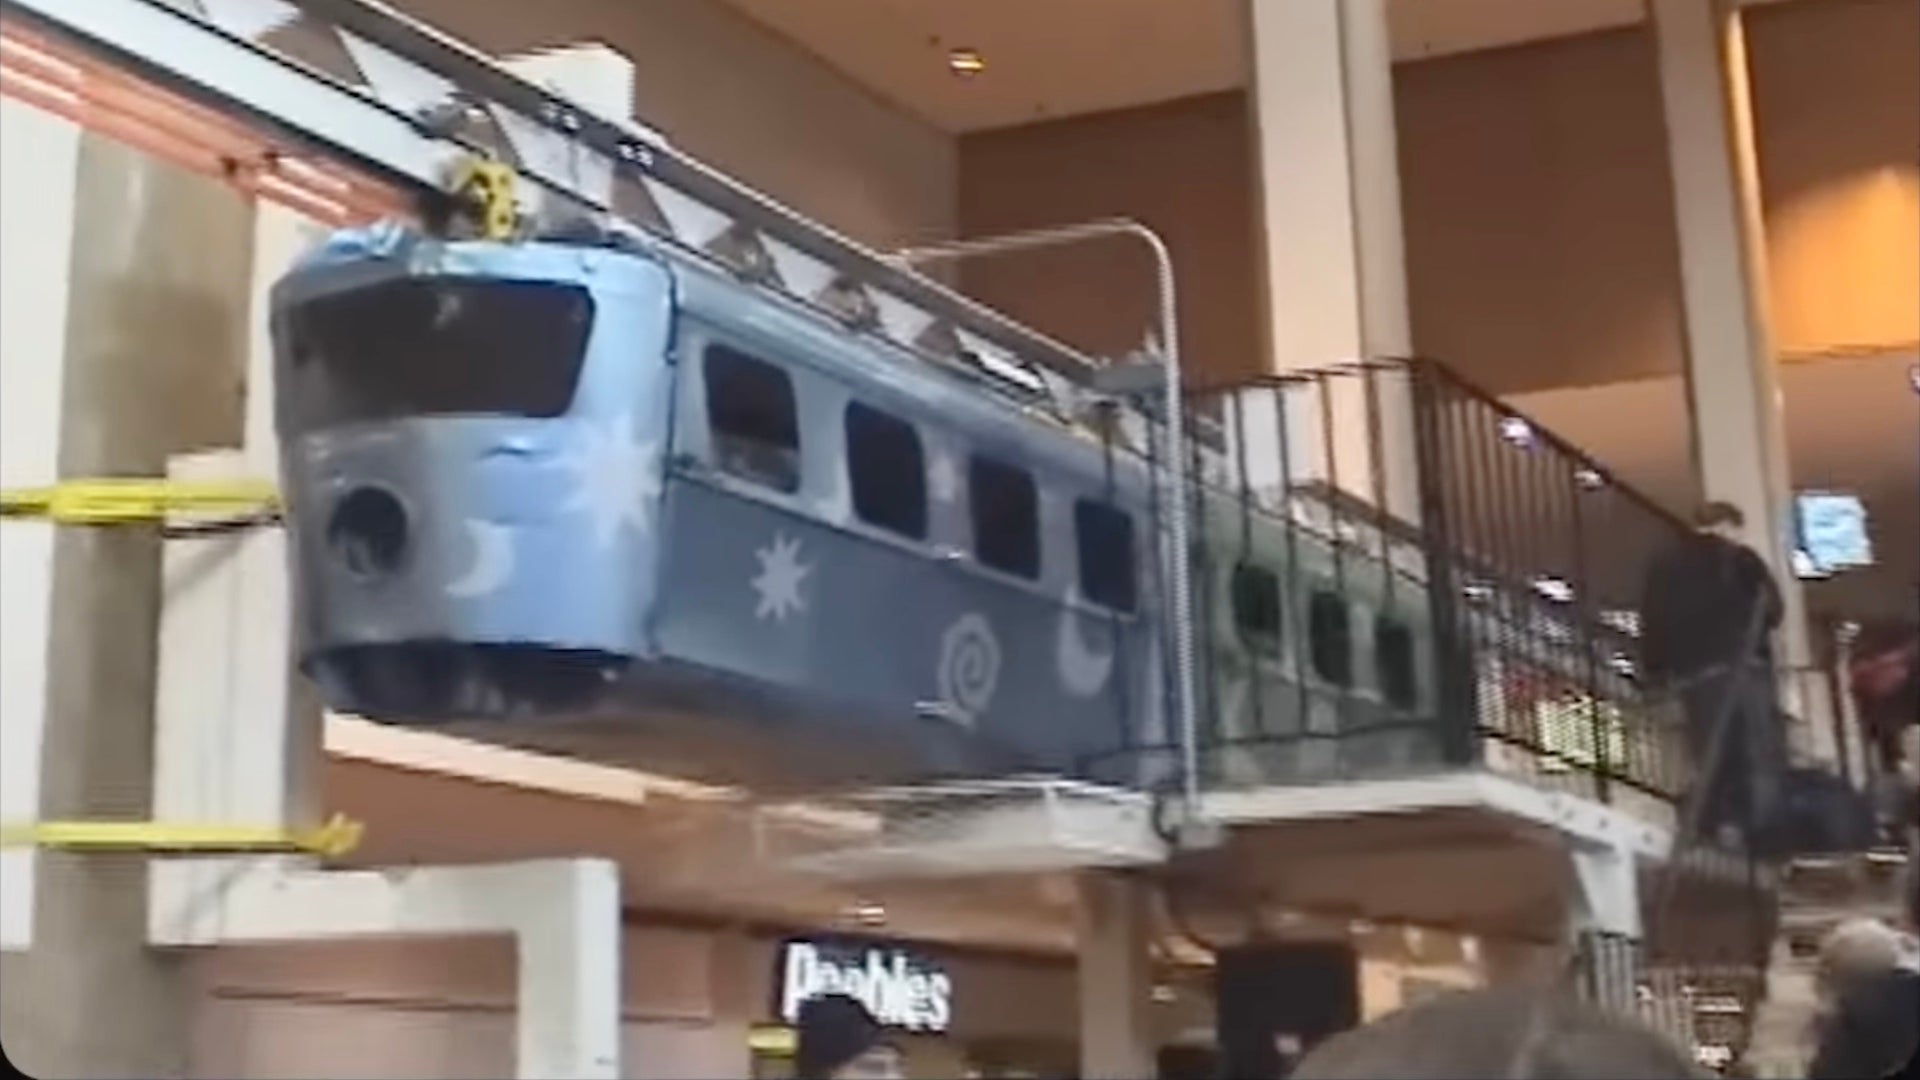 Today’s kids will not have the memory of department store monorails